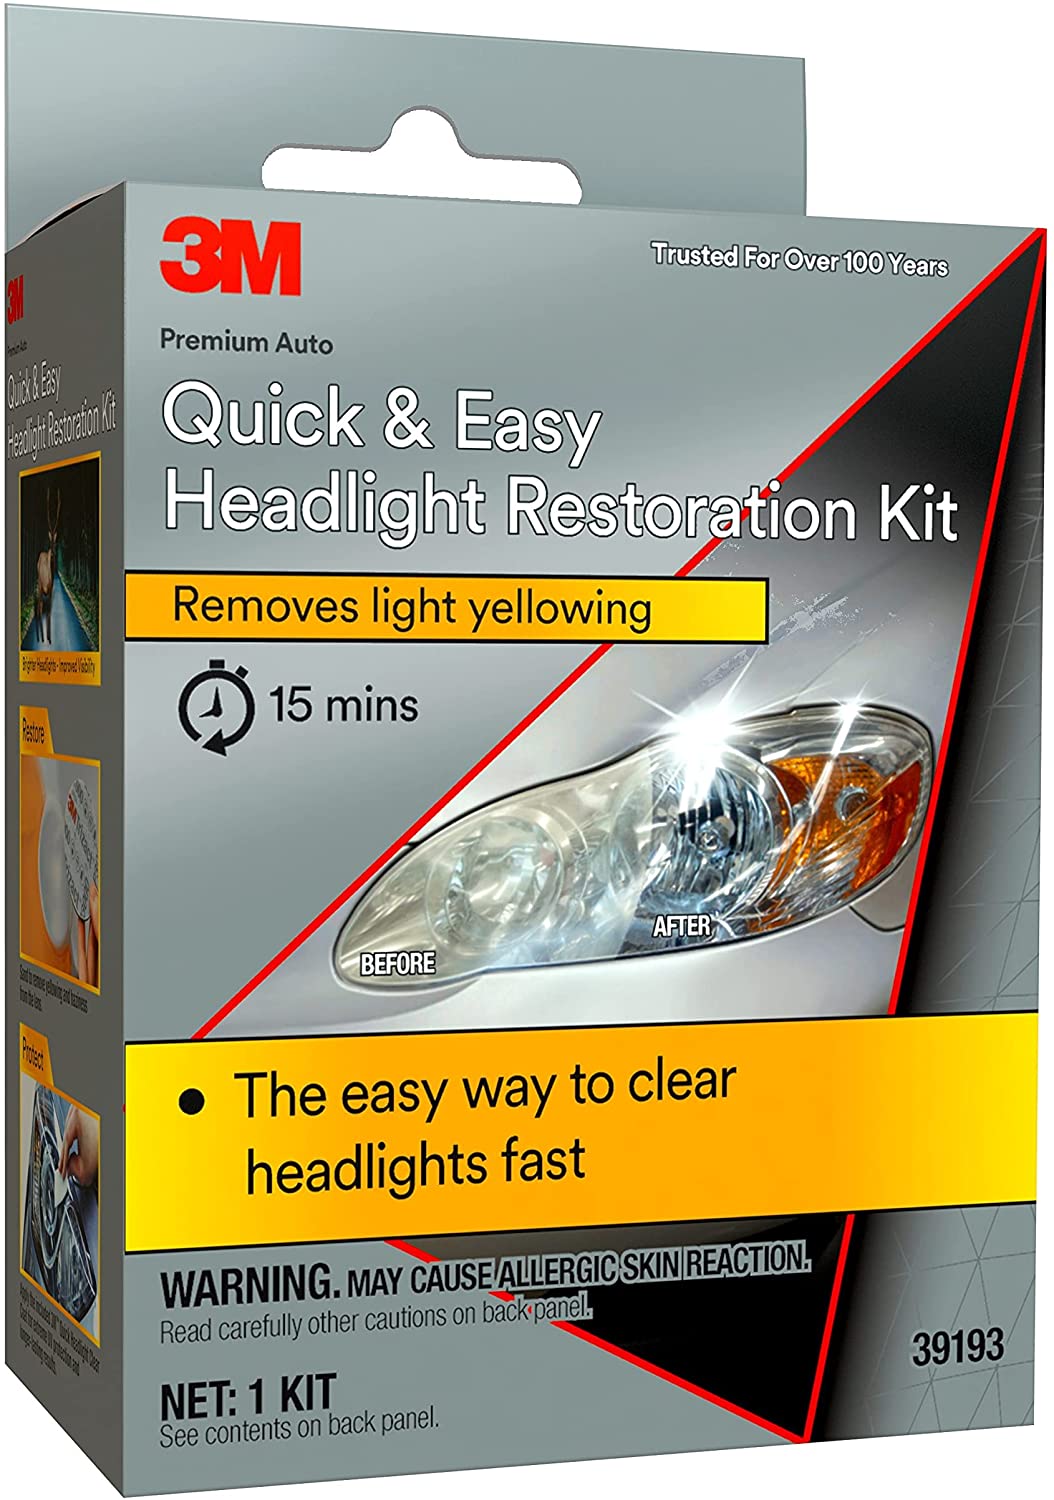 3M Quick and Easy Headlight Restoration Kit, Removes Light Yellowing in 15-Minutes - 39193 Easy to Use